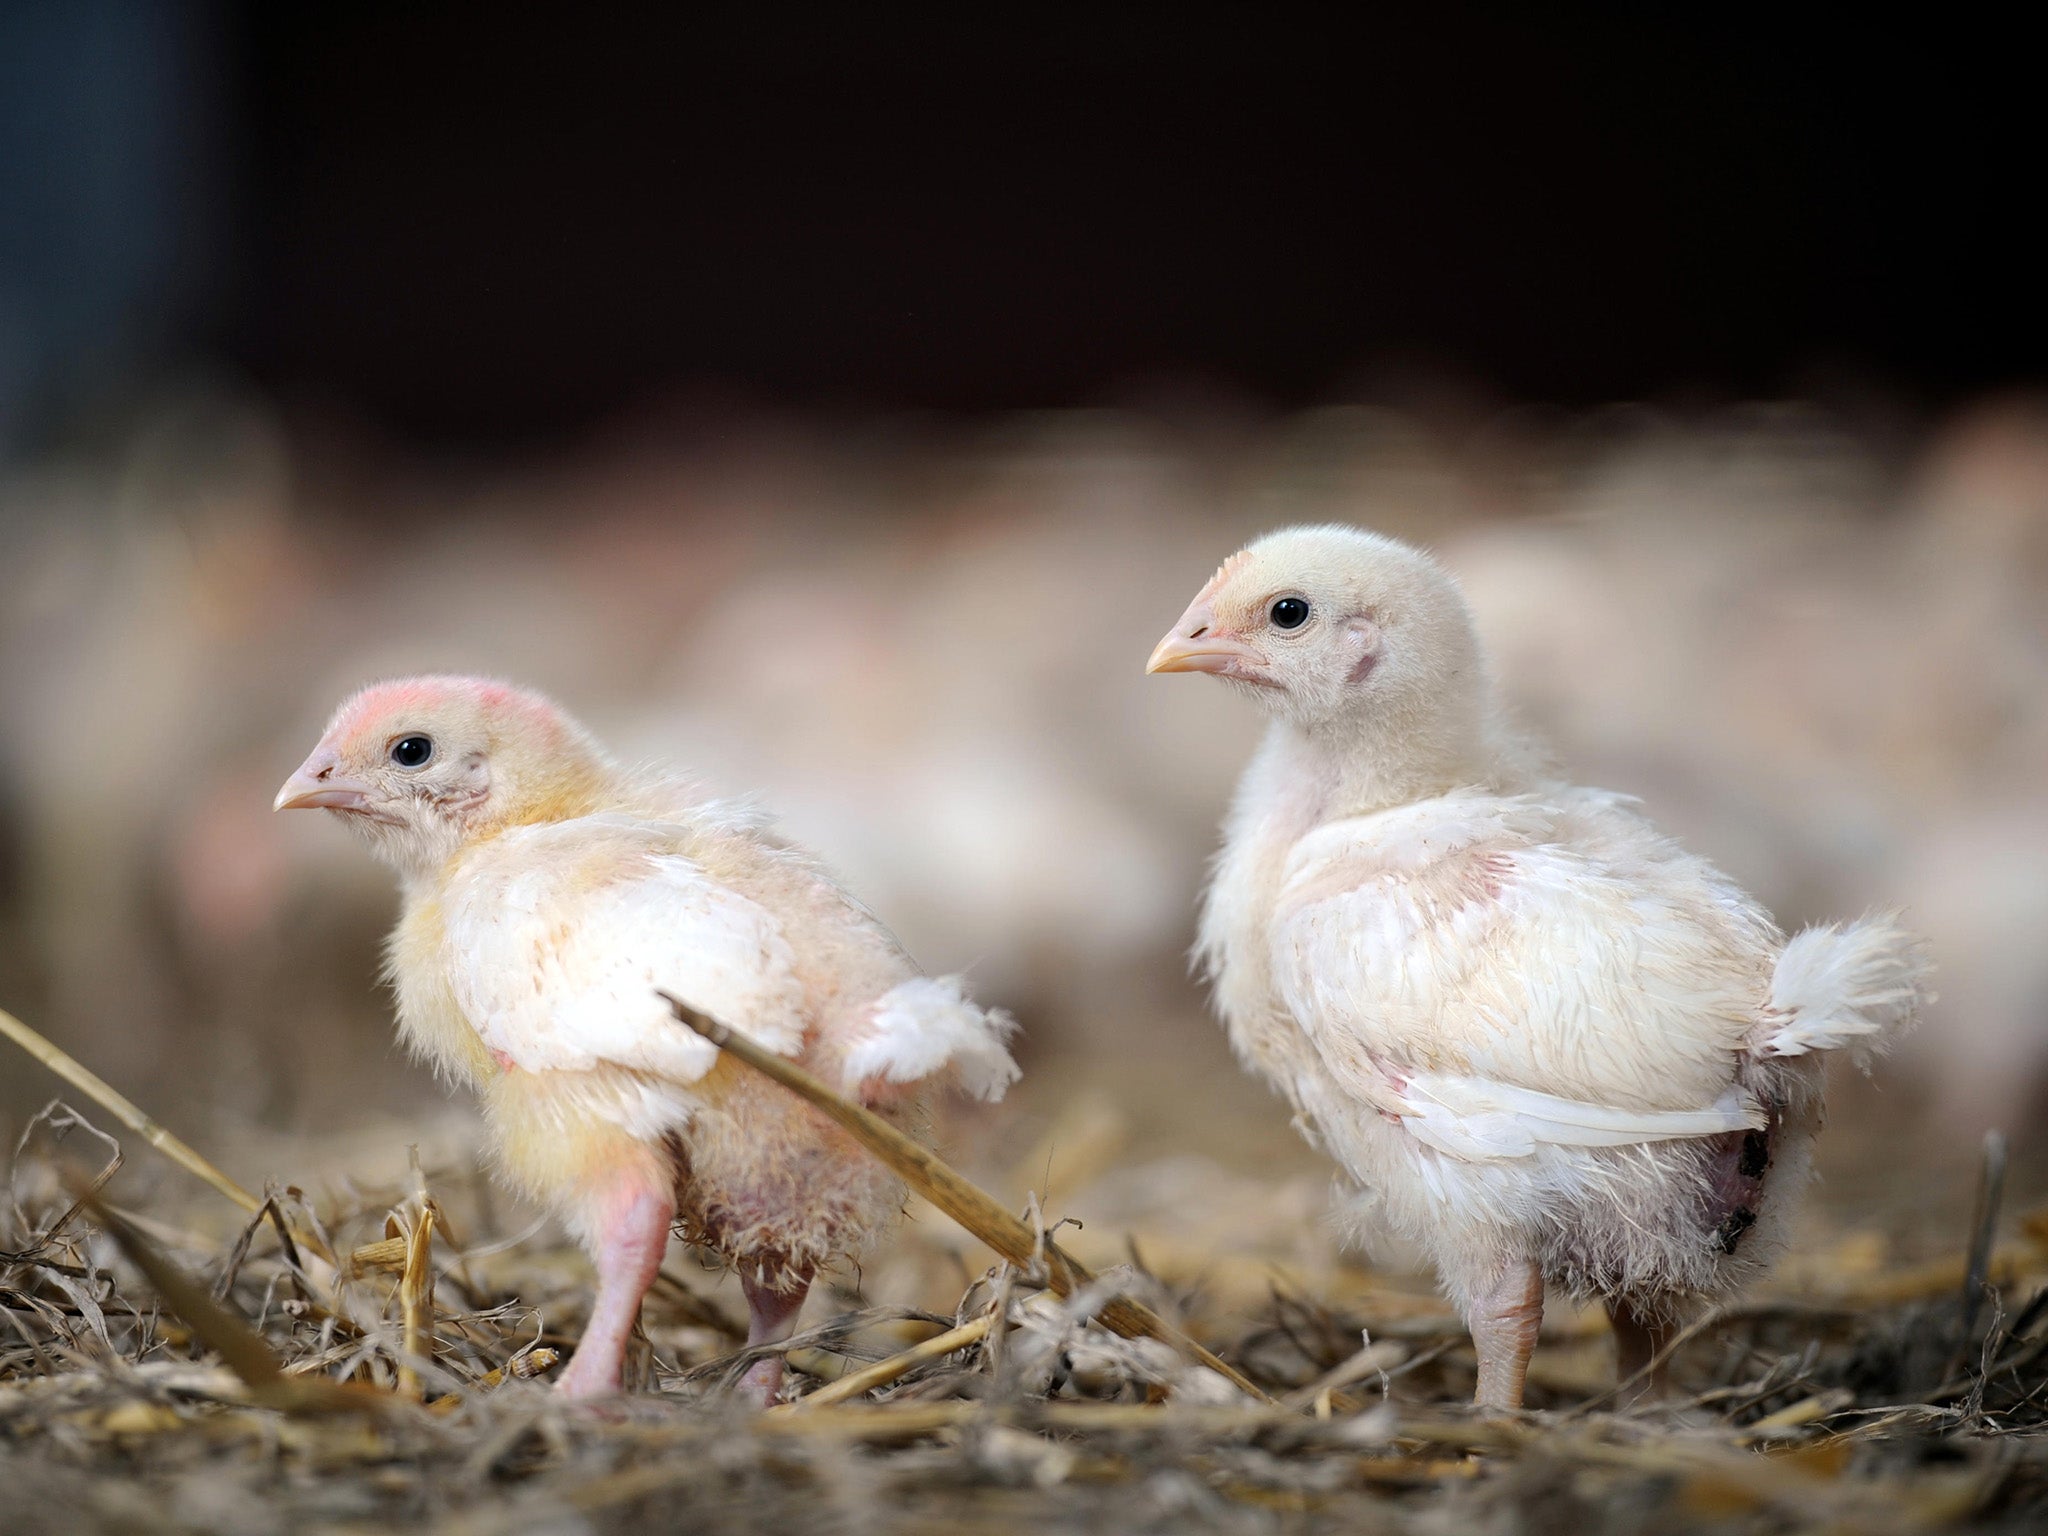 <p>The poultry industry has managed to keep a low profile while undergoing a massive expansion to supply all the supermarkets and fast food chains</p>